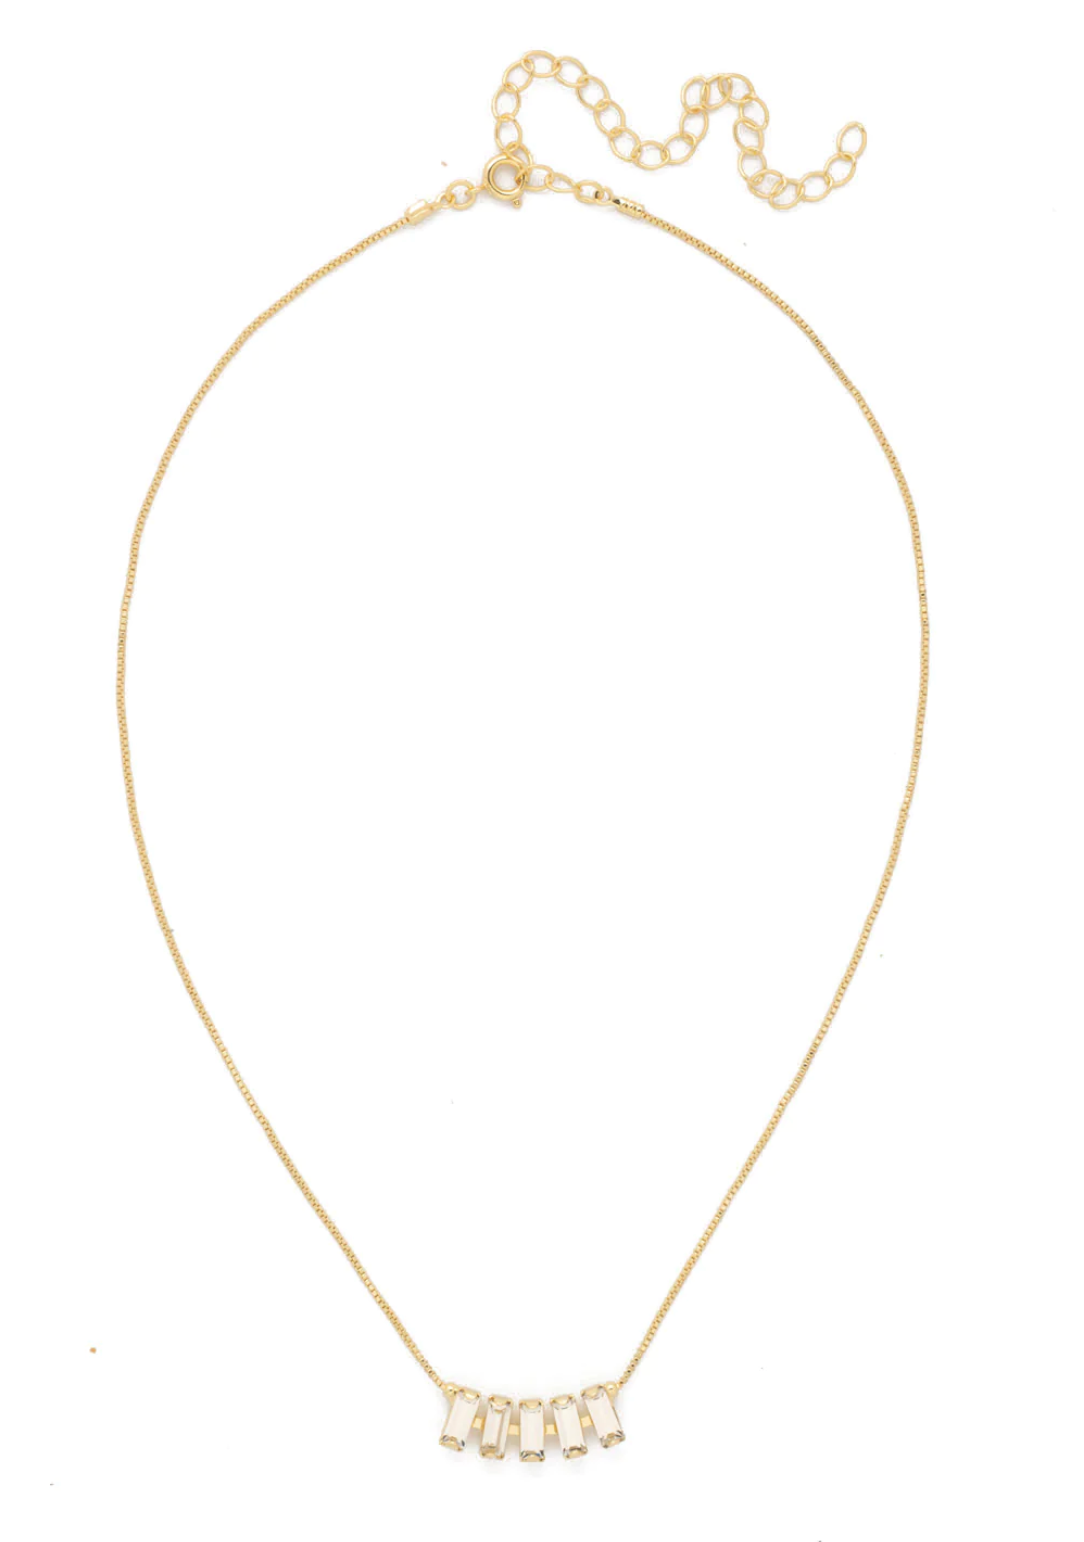 Crown Tennis Necklace - Bright Gold/Crystal